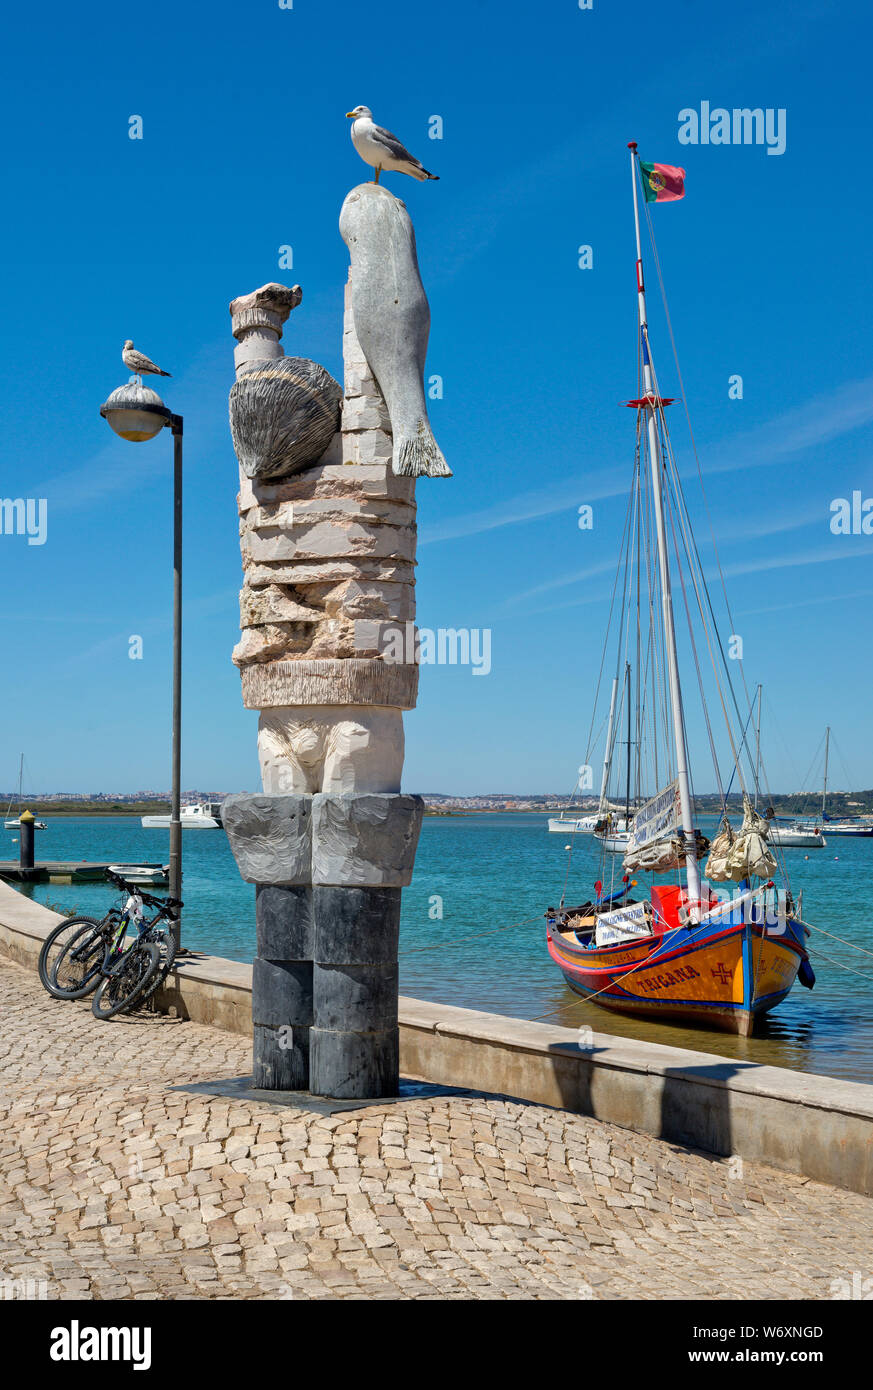 modern sculpture of a fisherman by Joao Cutileiro, on Alvor habour front, the Algarve, Portugal Stock Photo